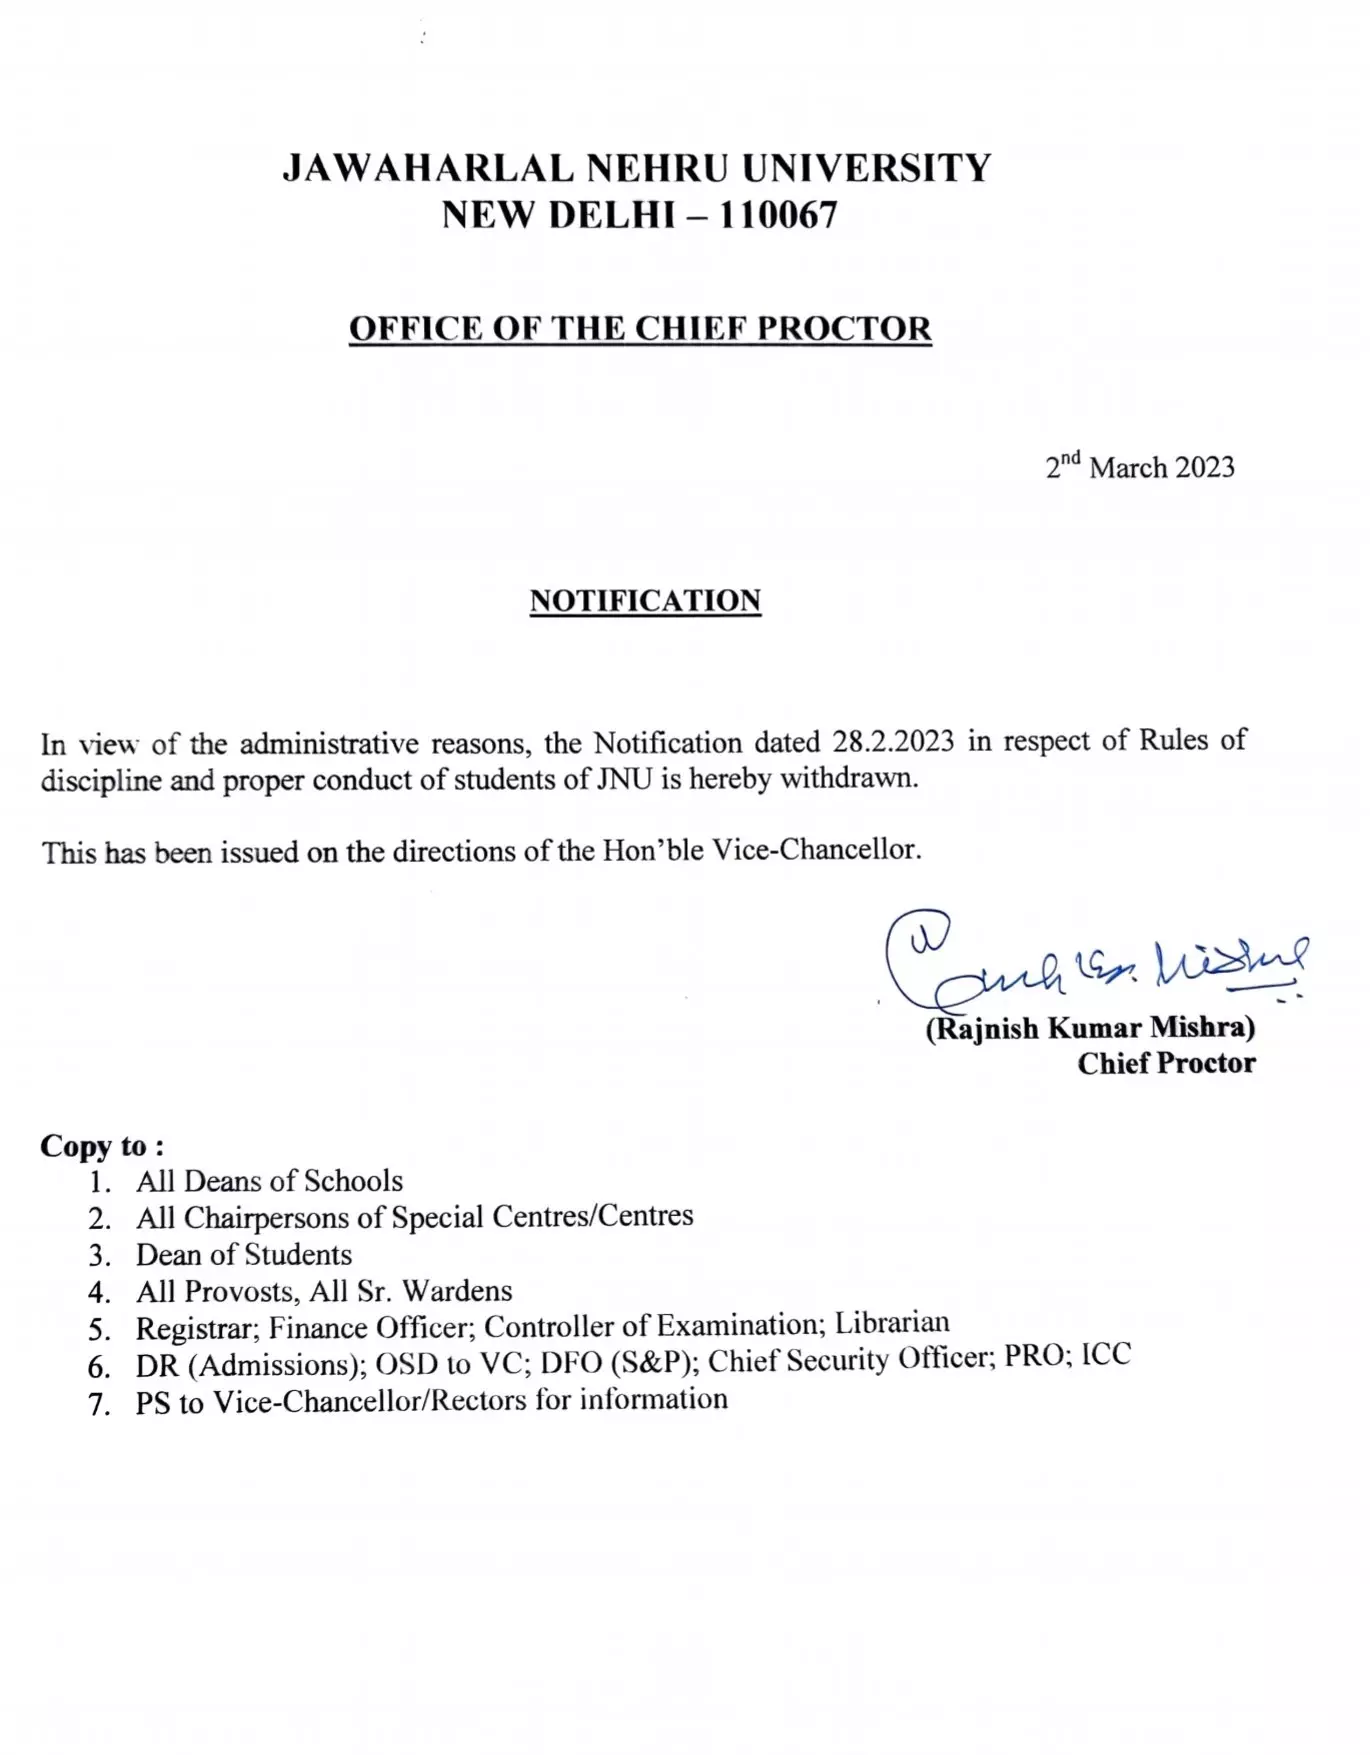 Notification issued by JNU on March 2